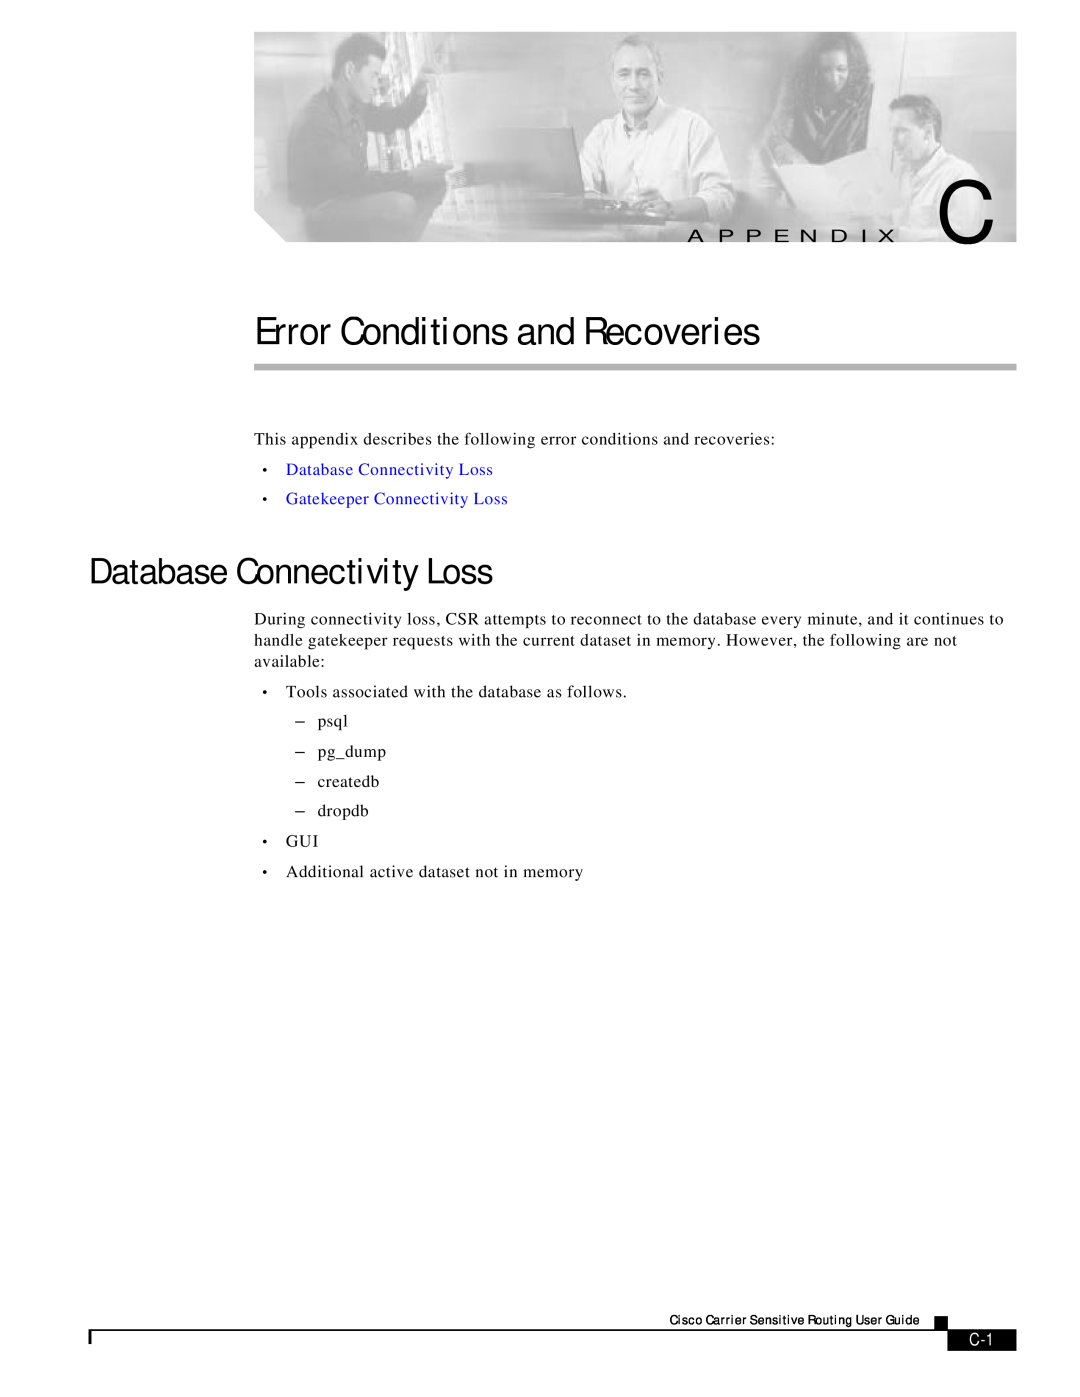 Cisco Systems Version 1.1 manual Error Conditions and Recoveries, Database Connectivity Loss 